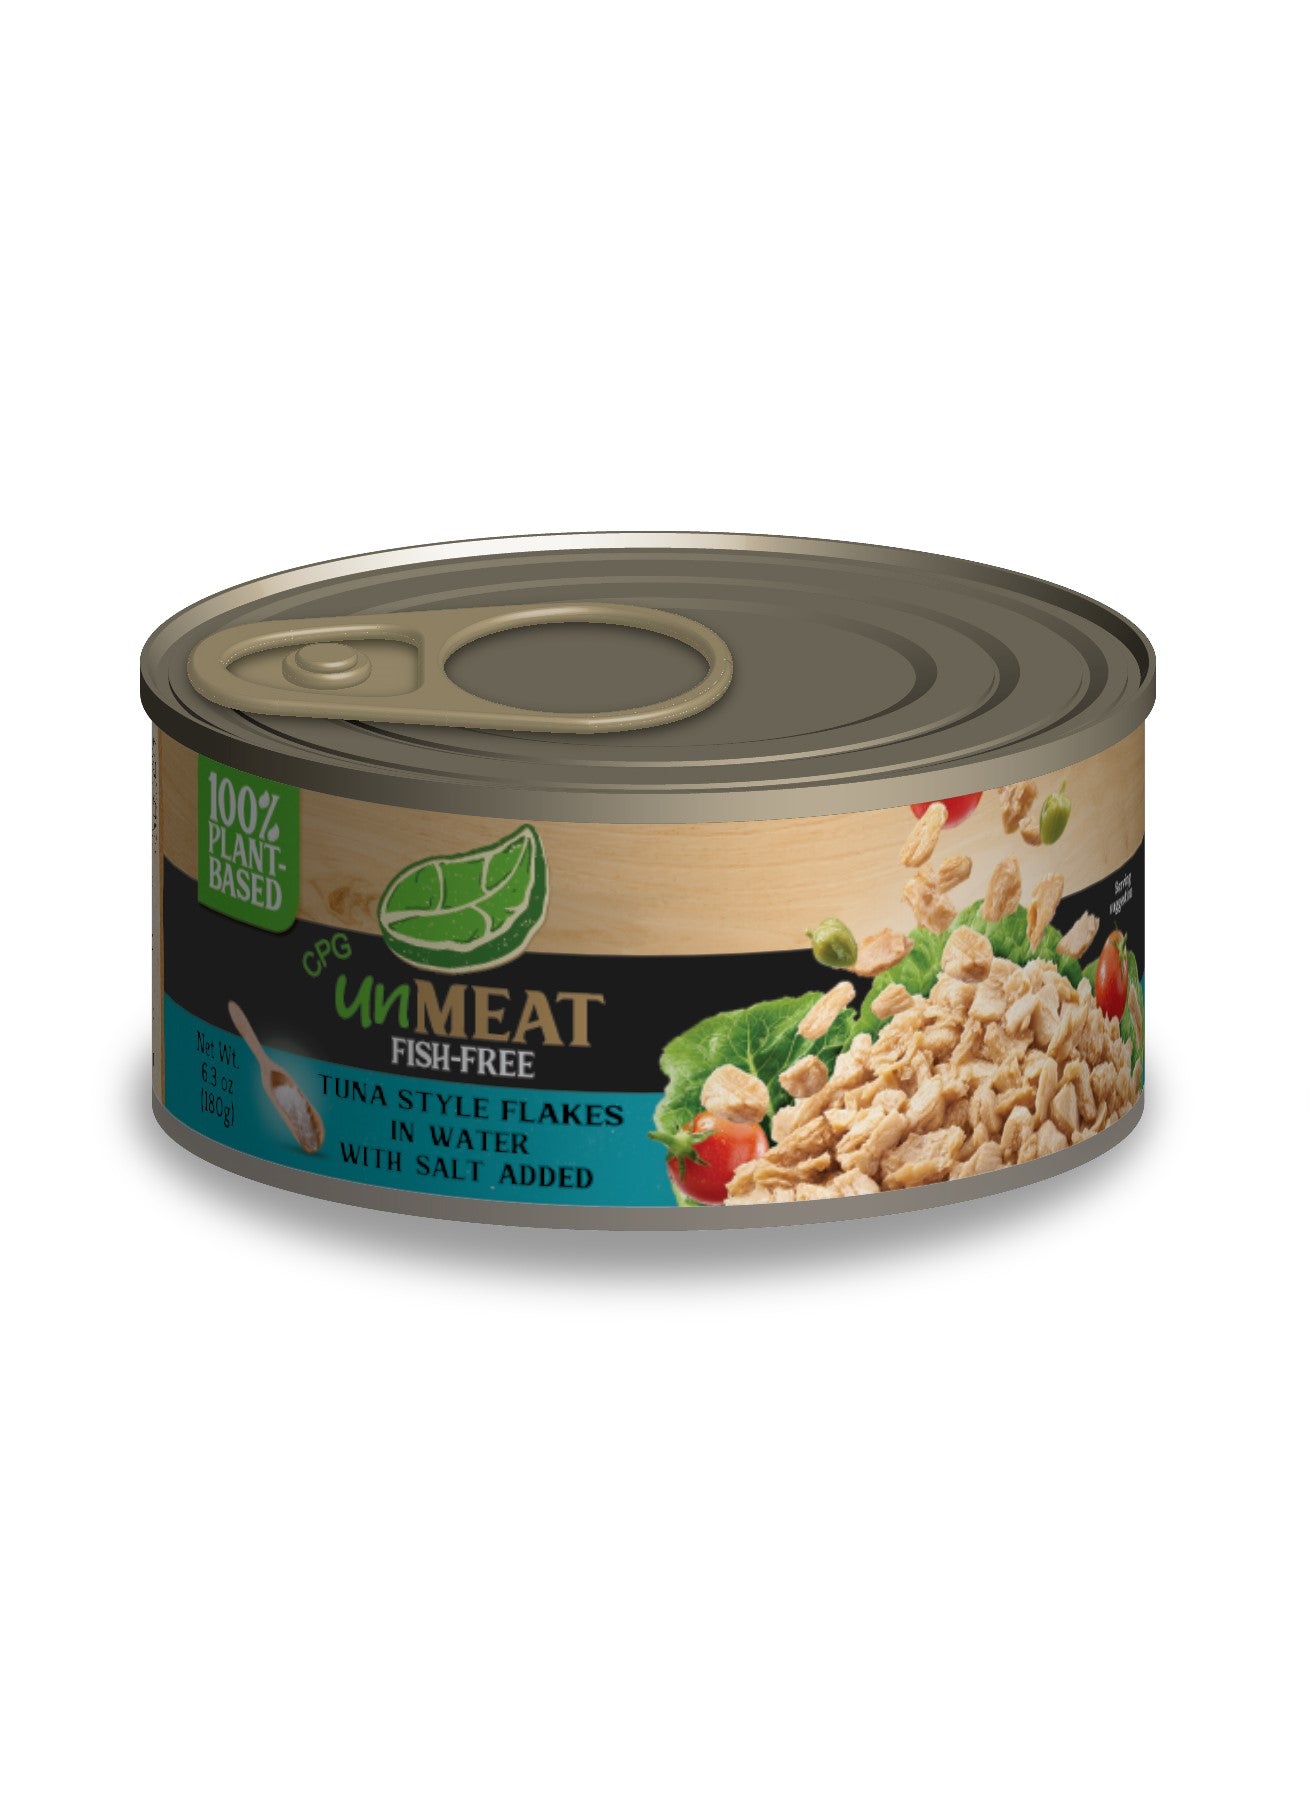 unMeat Fish-free Tuna Style Flakes in Water with Salt Added 180g